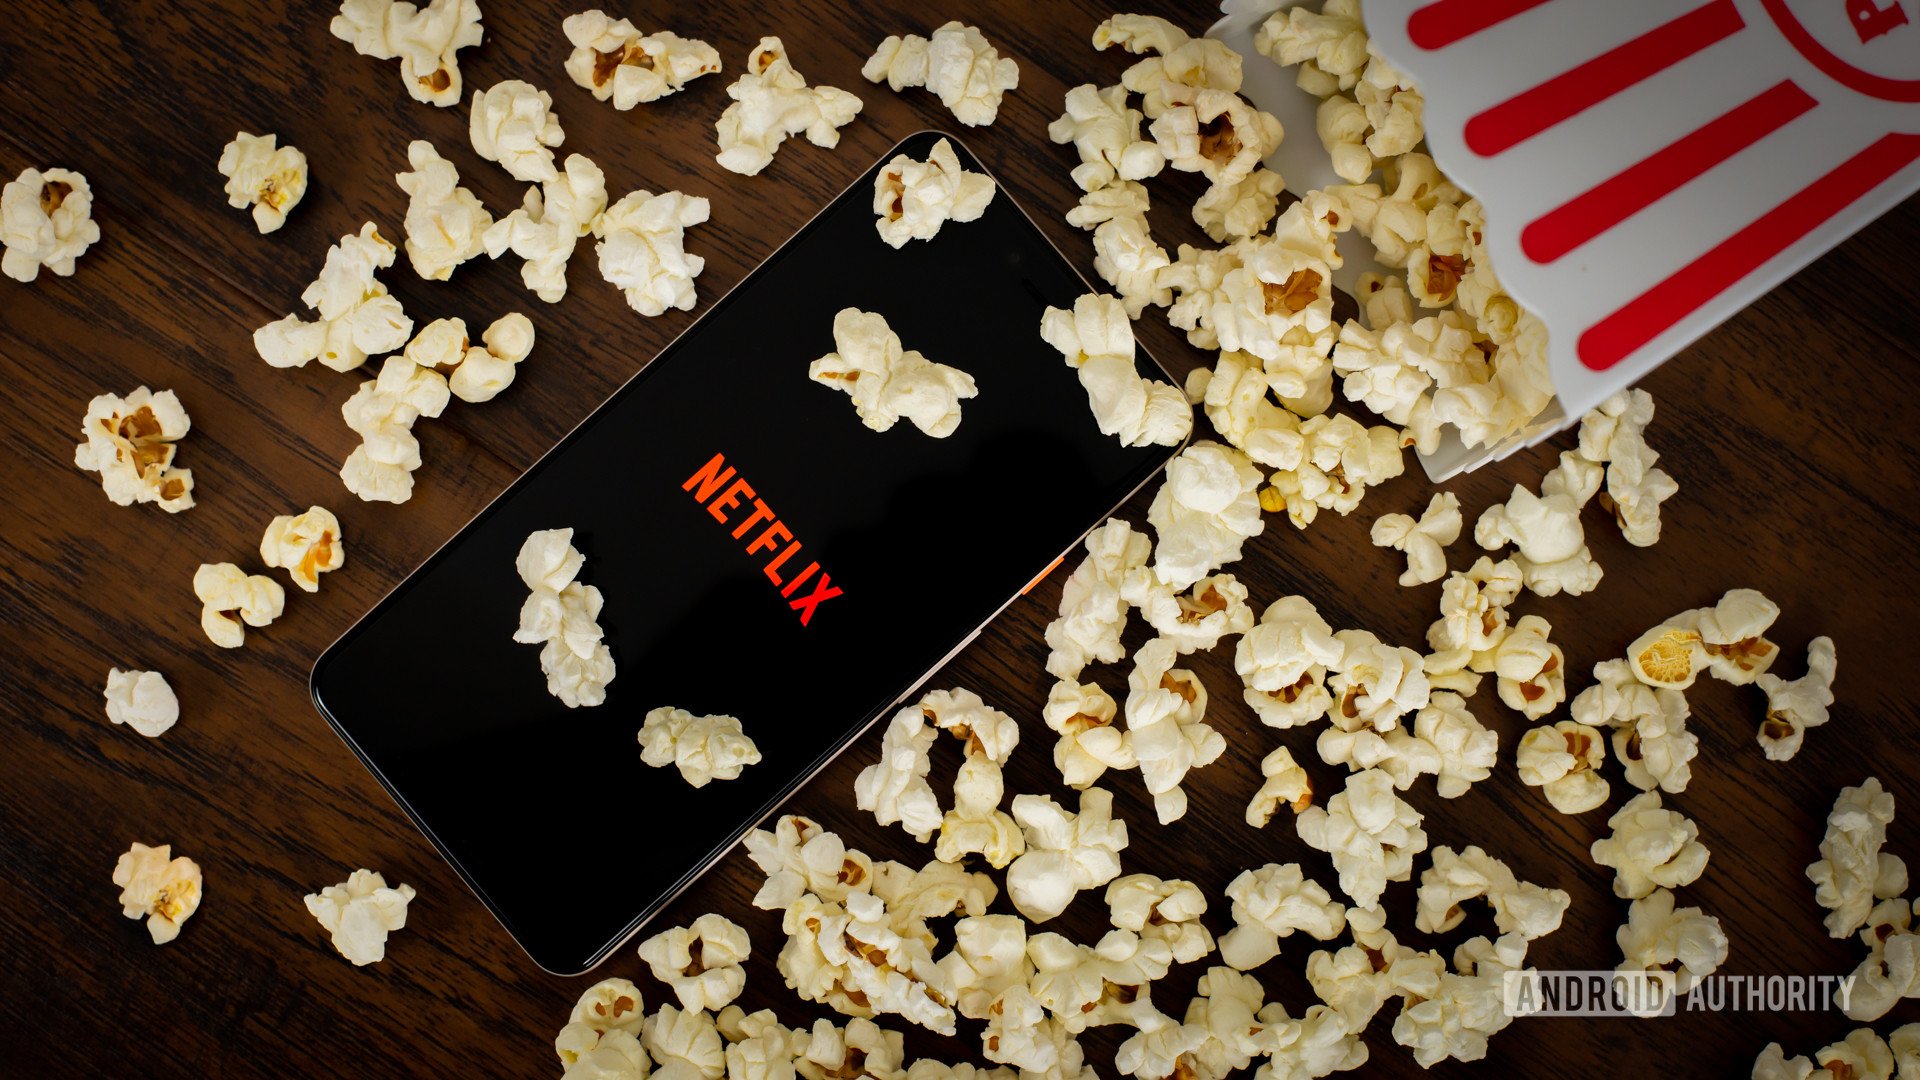 Tired of Netflix? Here are 16 great alternatives to try